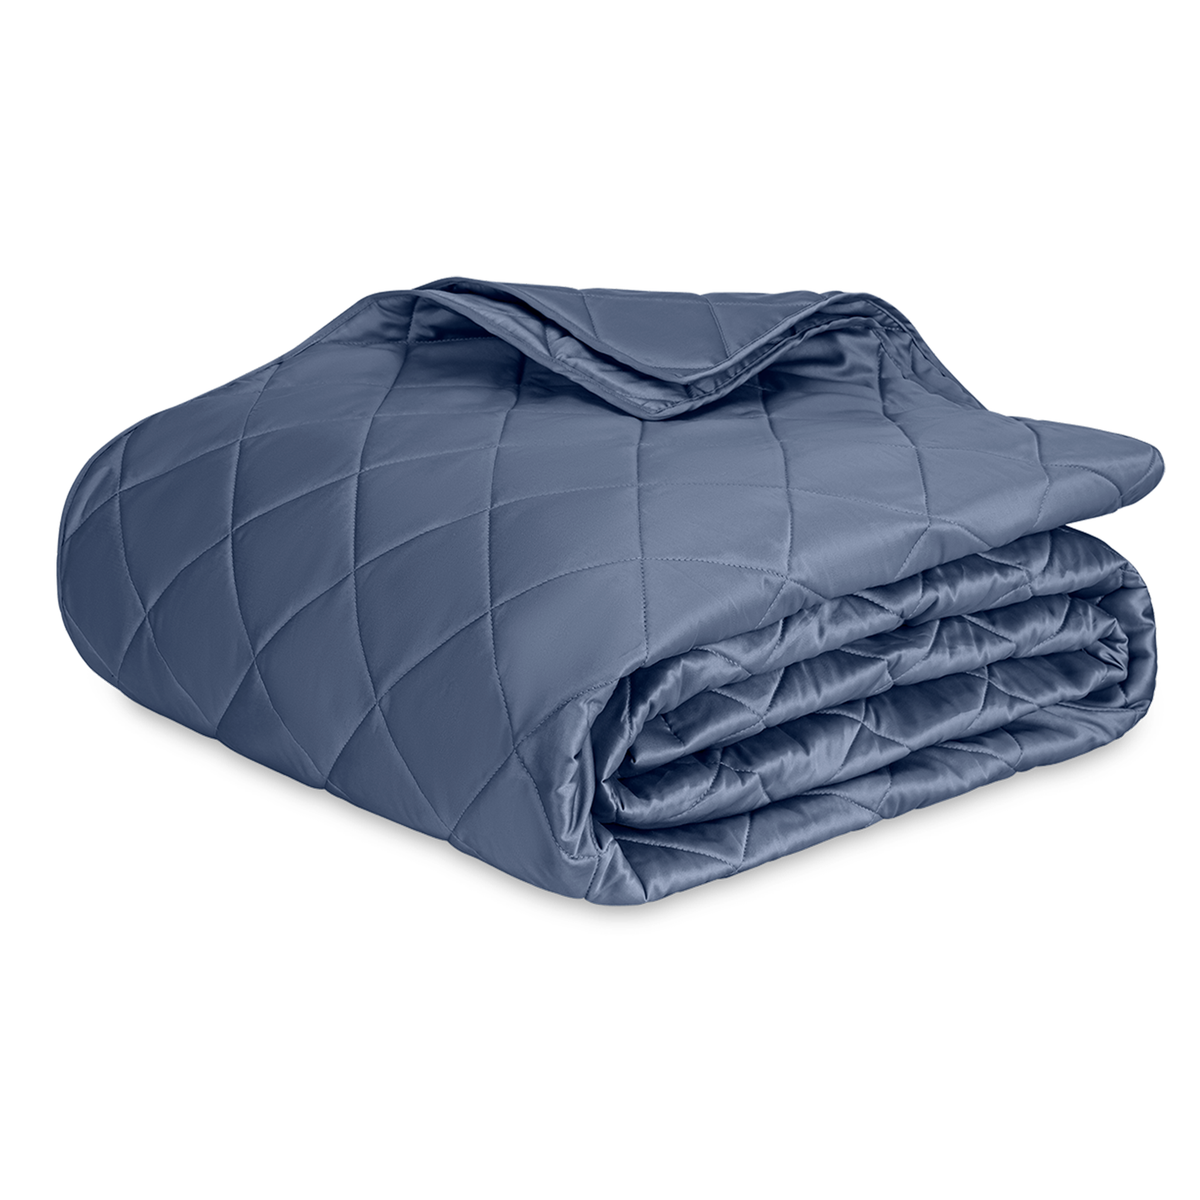 Silo Image of Matouk Nocturne Quilted Bedding Quilt in Steel Blue